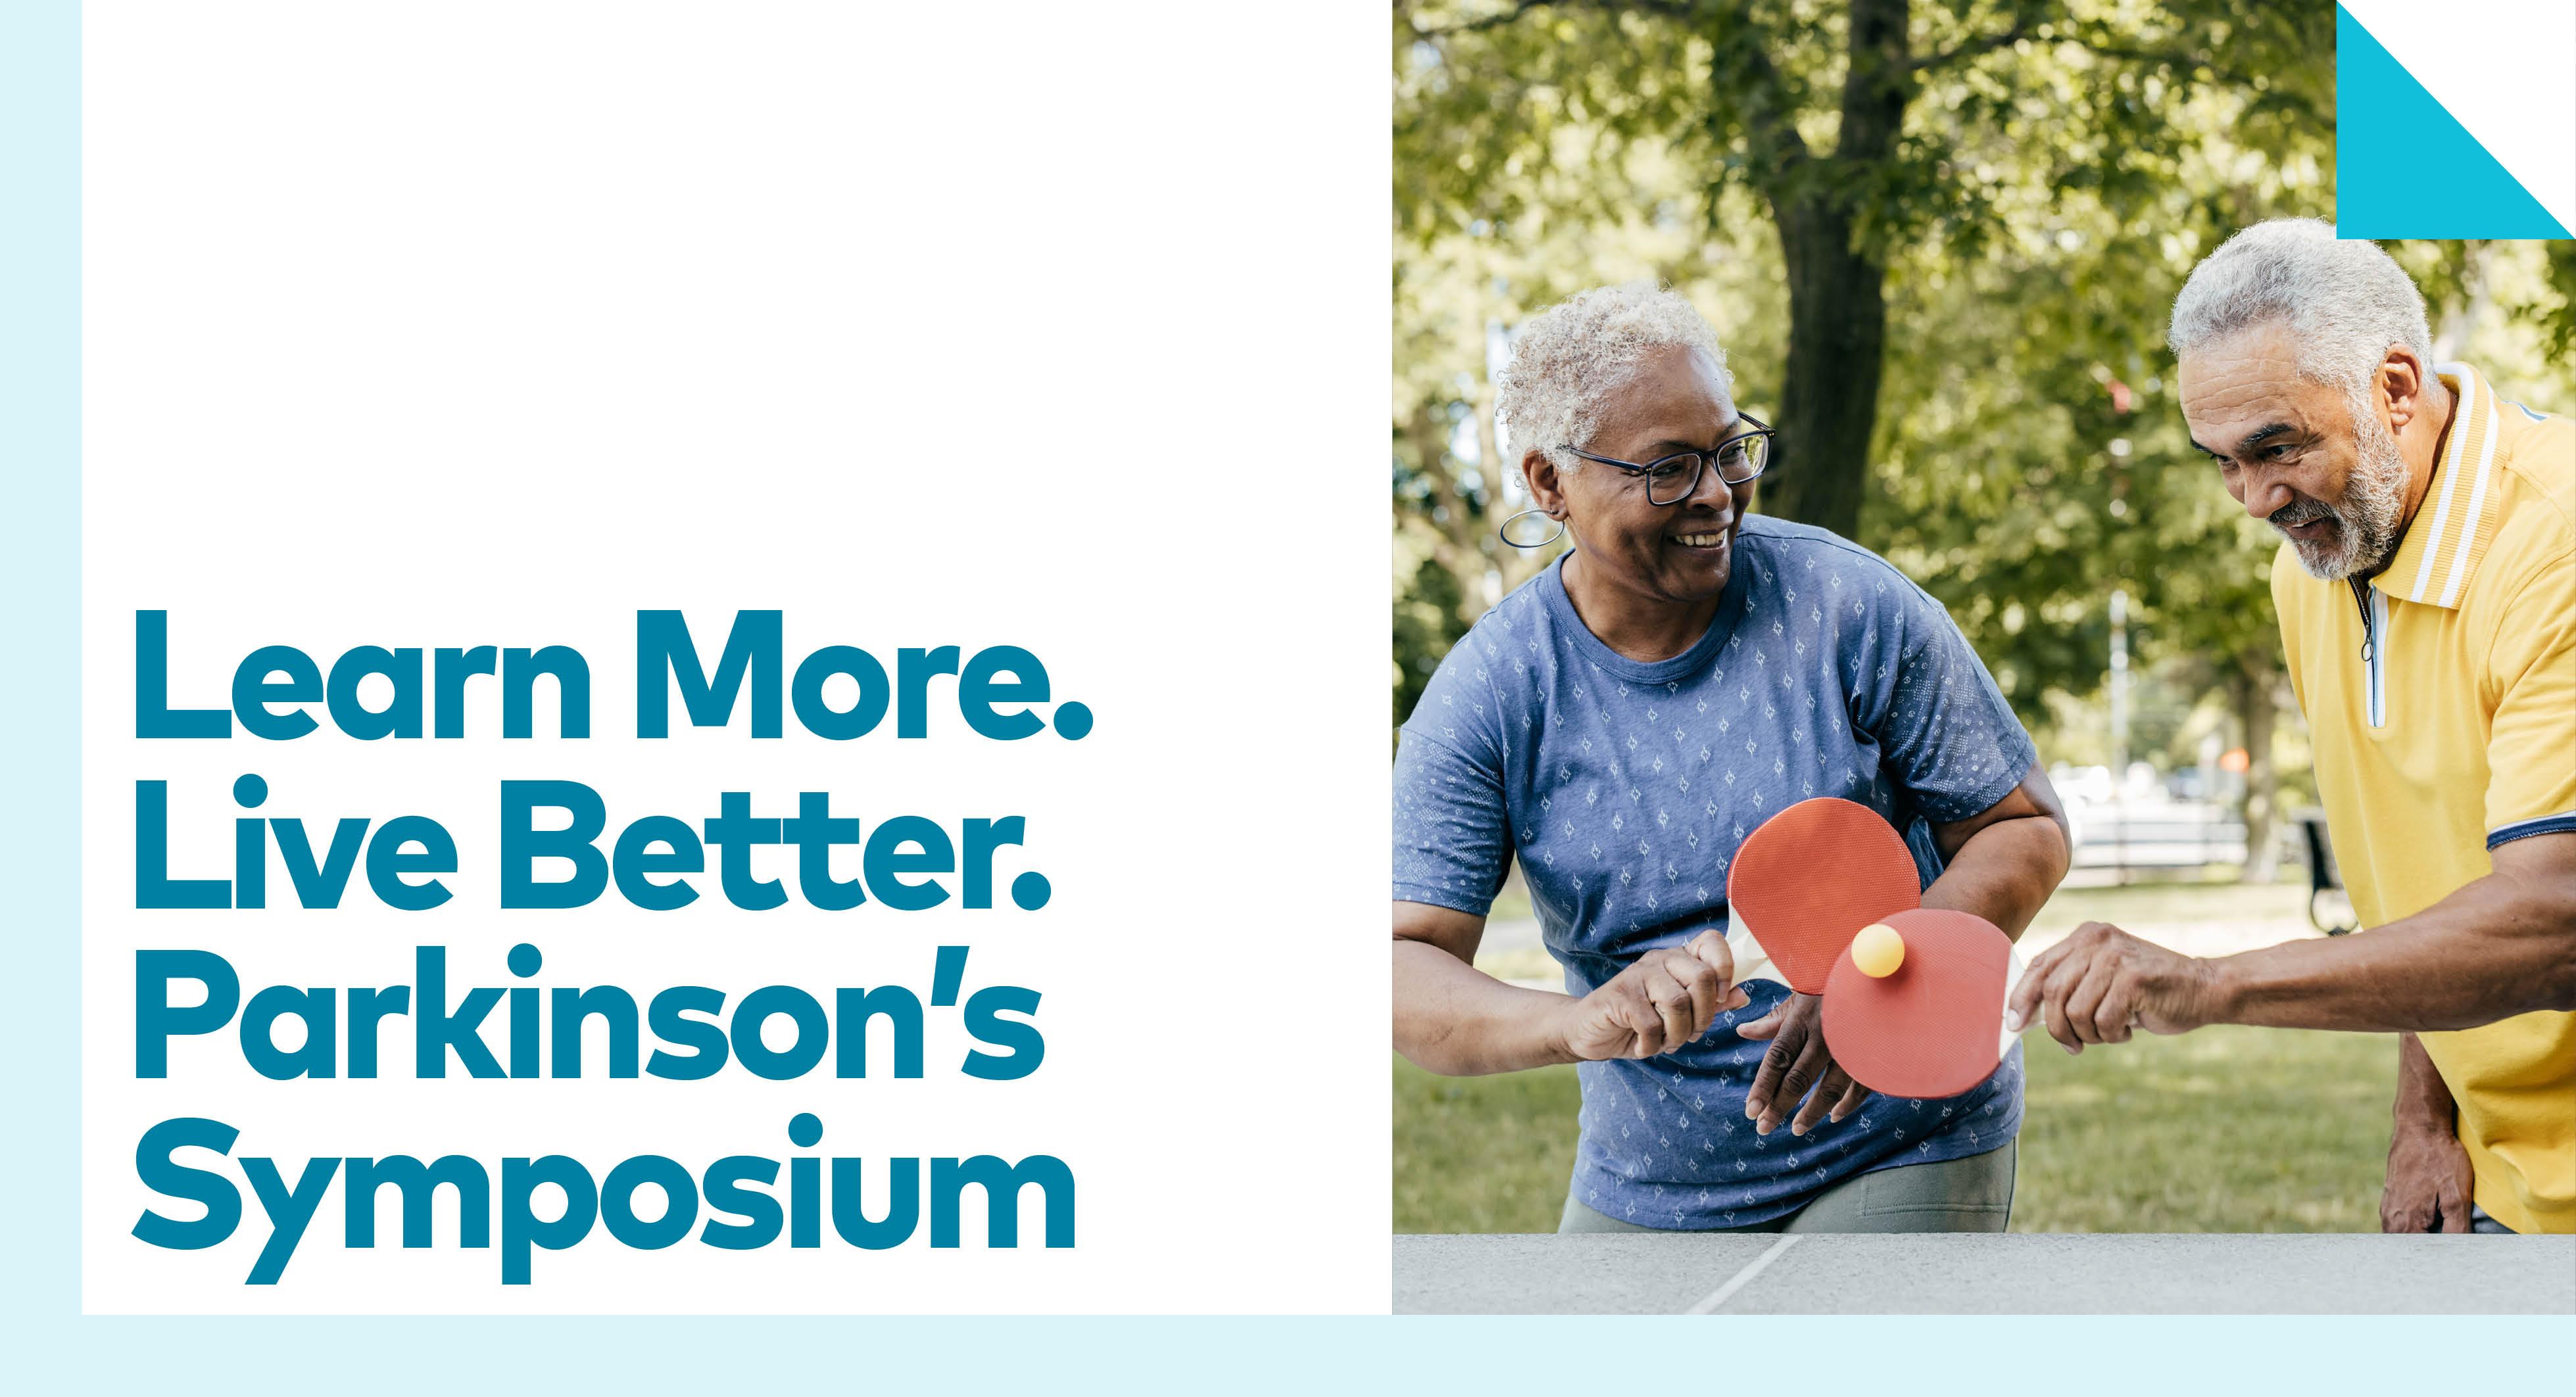 Learn More. Live Better. Parkinson's Symposium